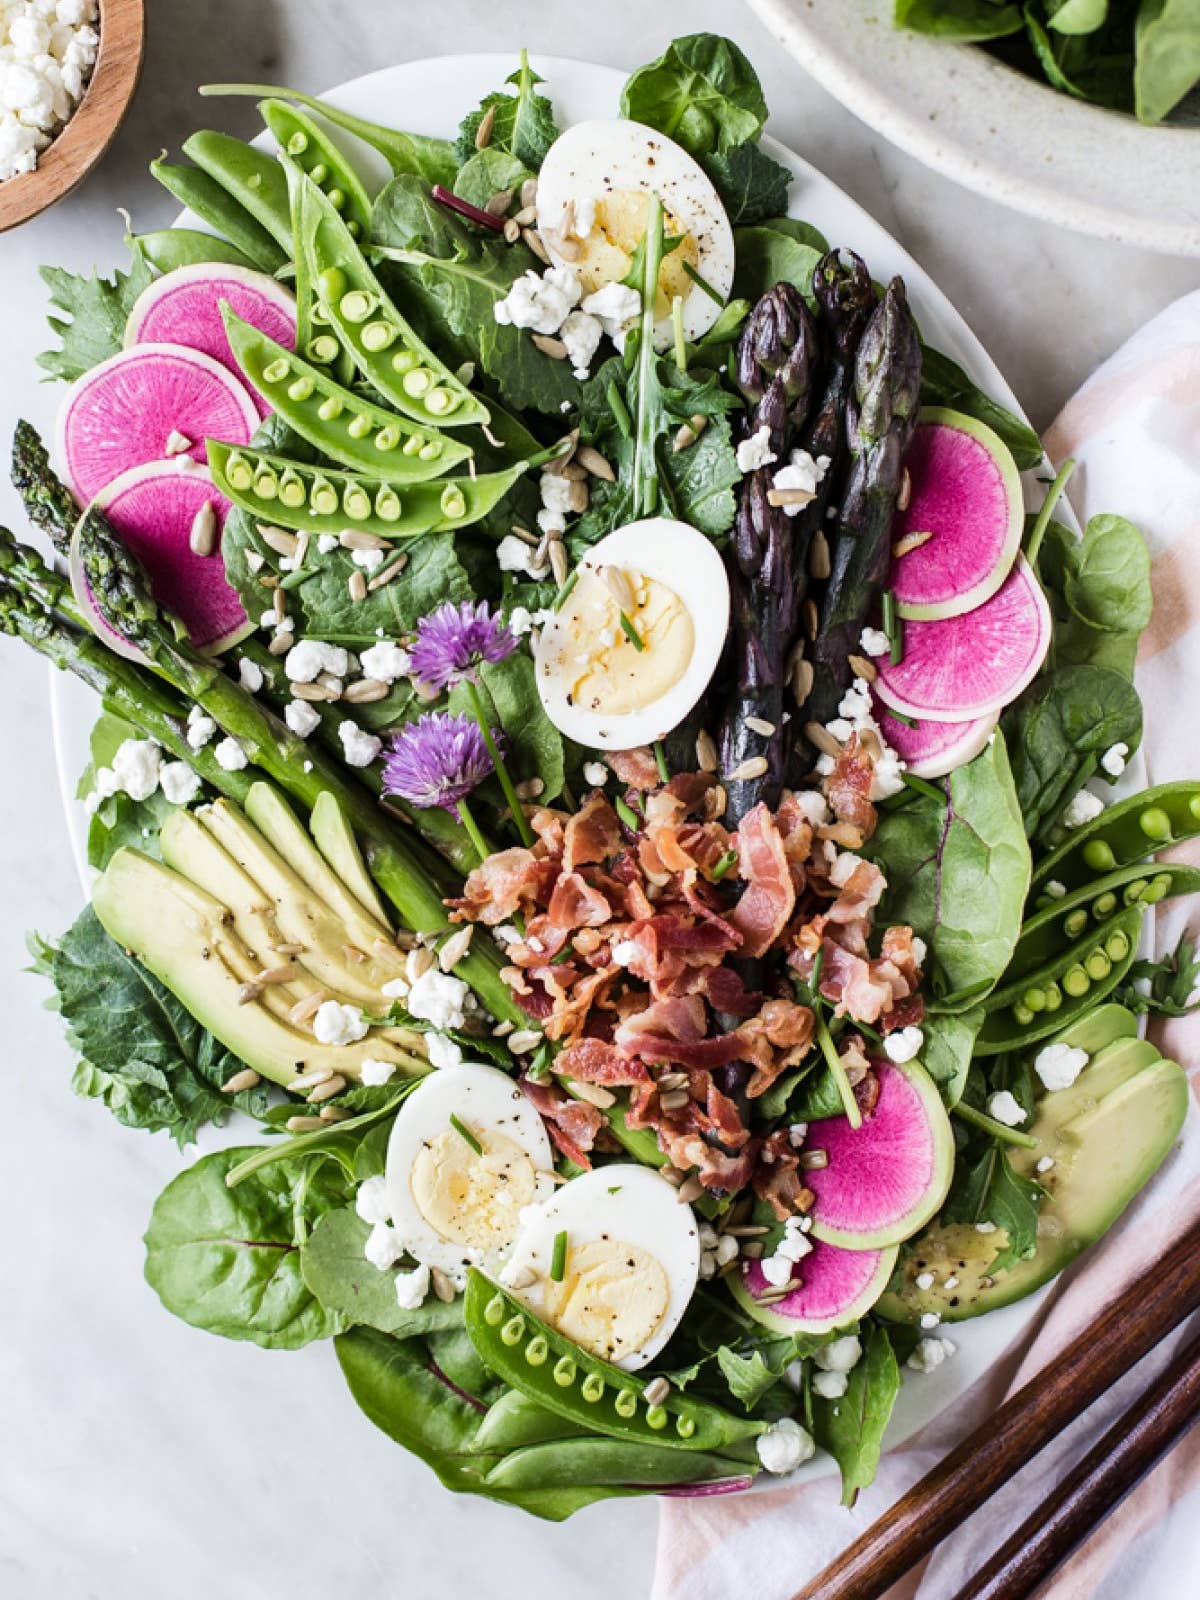 10 Zippy Green Salad Recipes You’ll Actually Be Excited to Eat